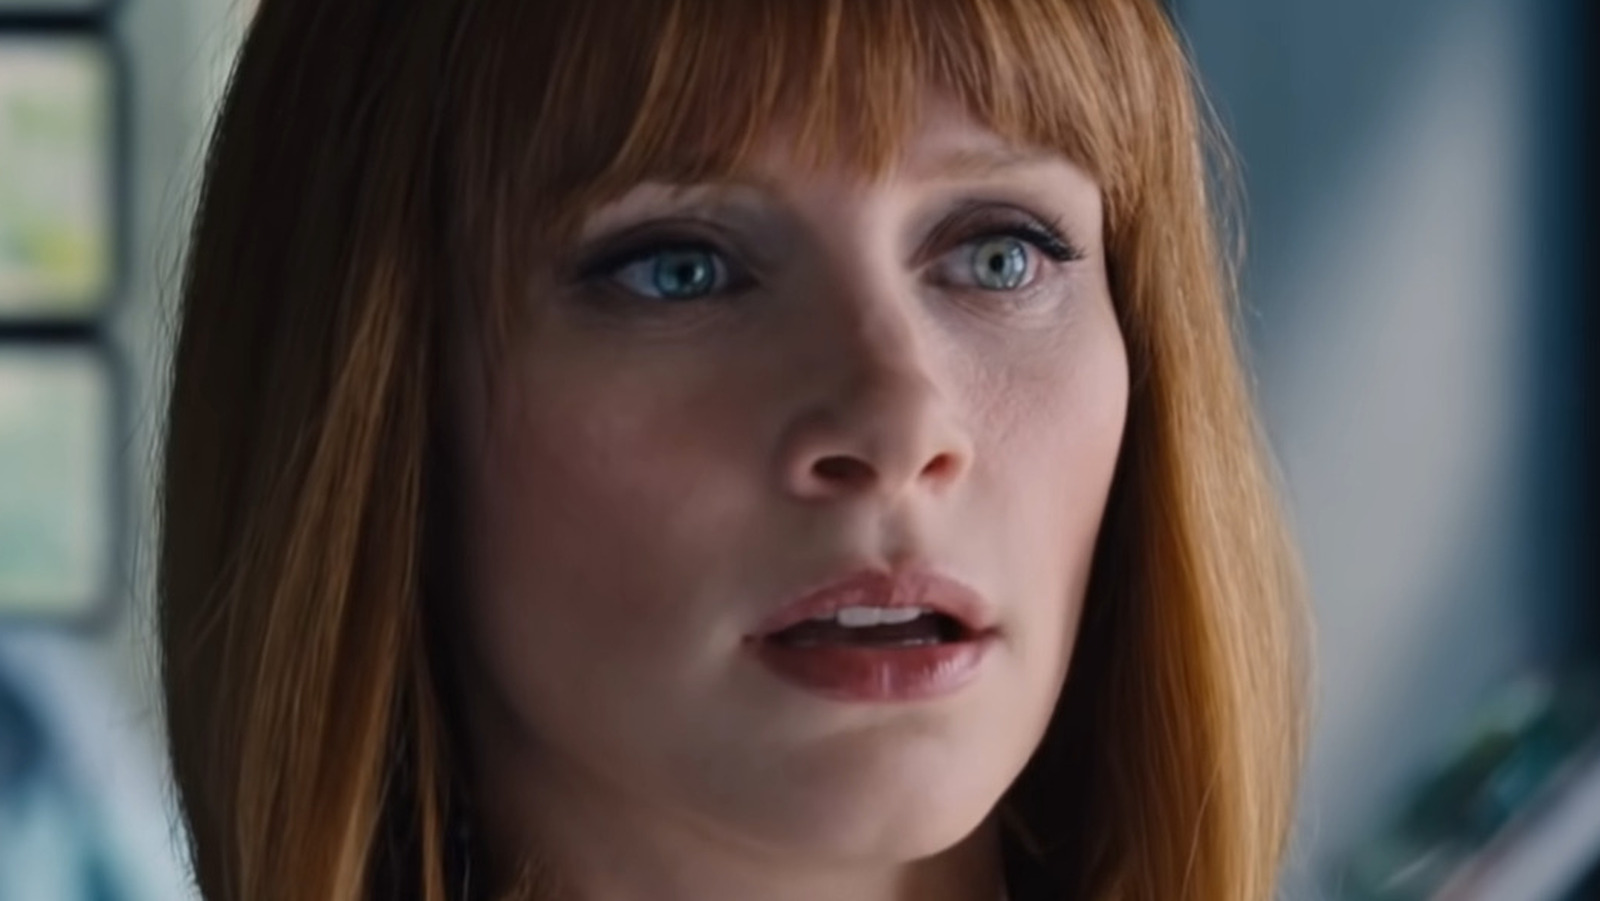 A Surprising Number Of Fans Said Jurassic World Was Their Favorite Movie In The Jurassic Park 